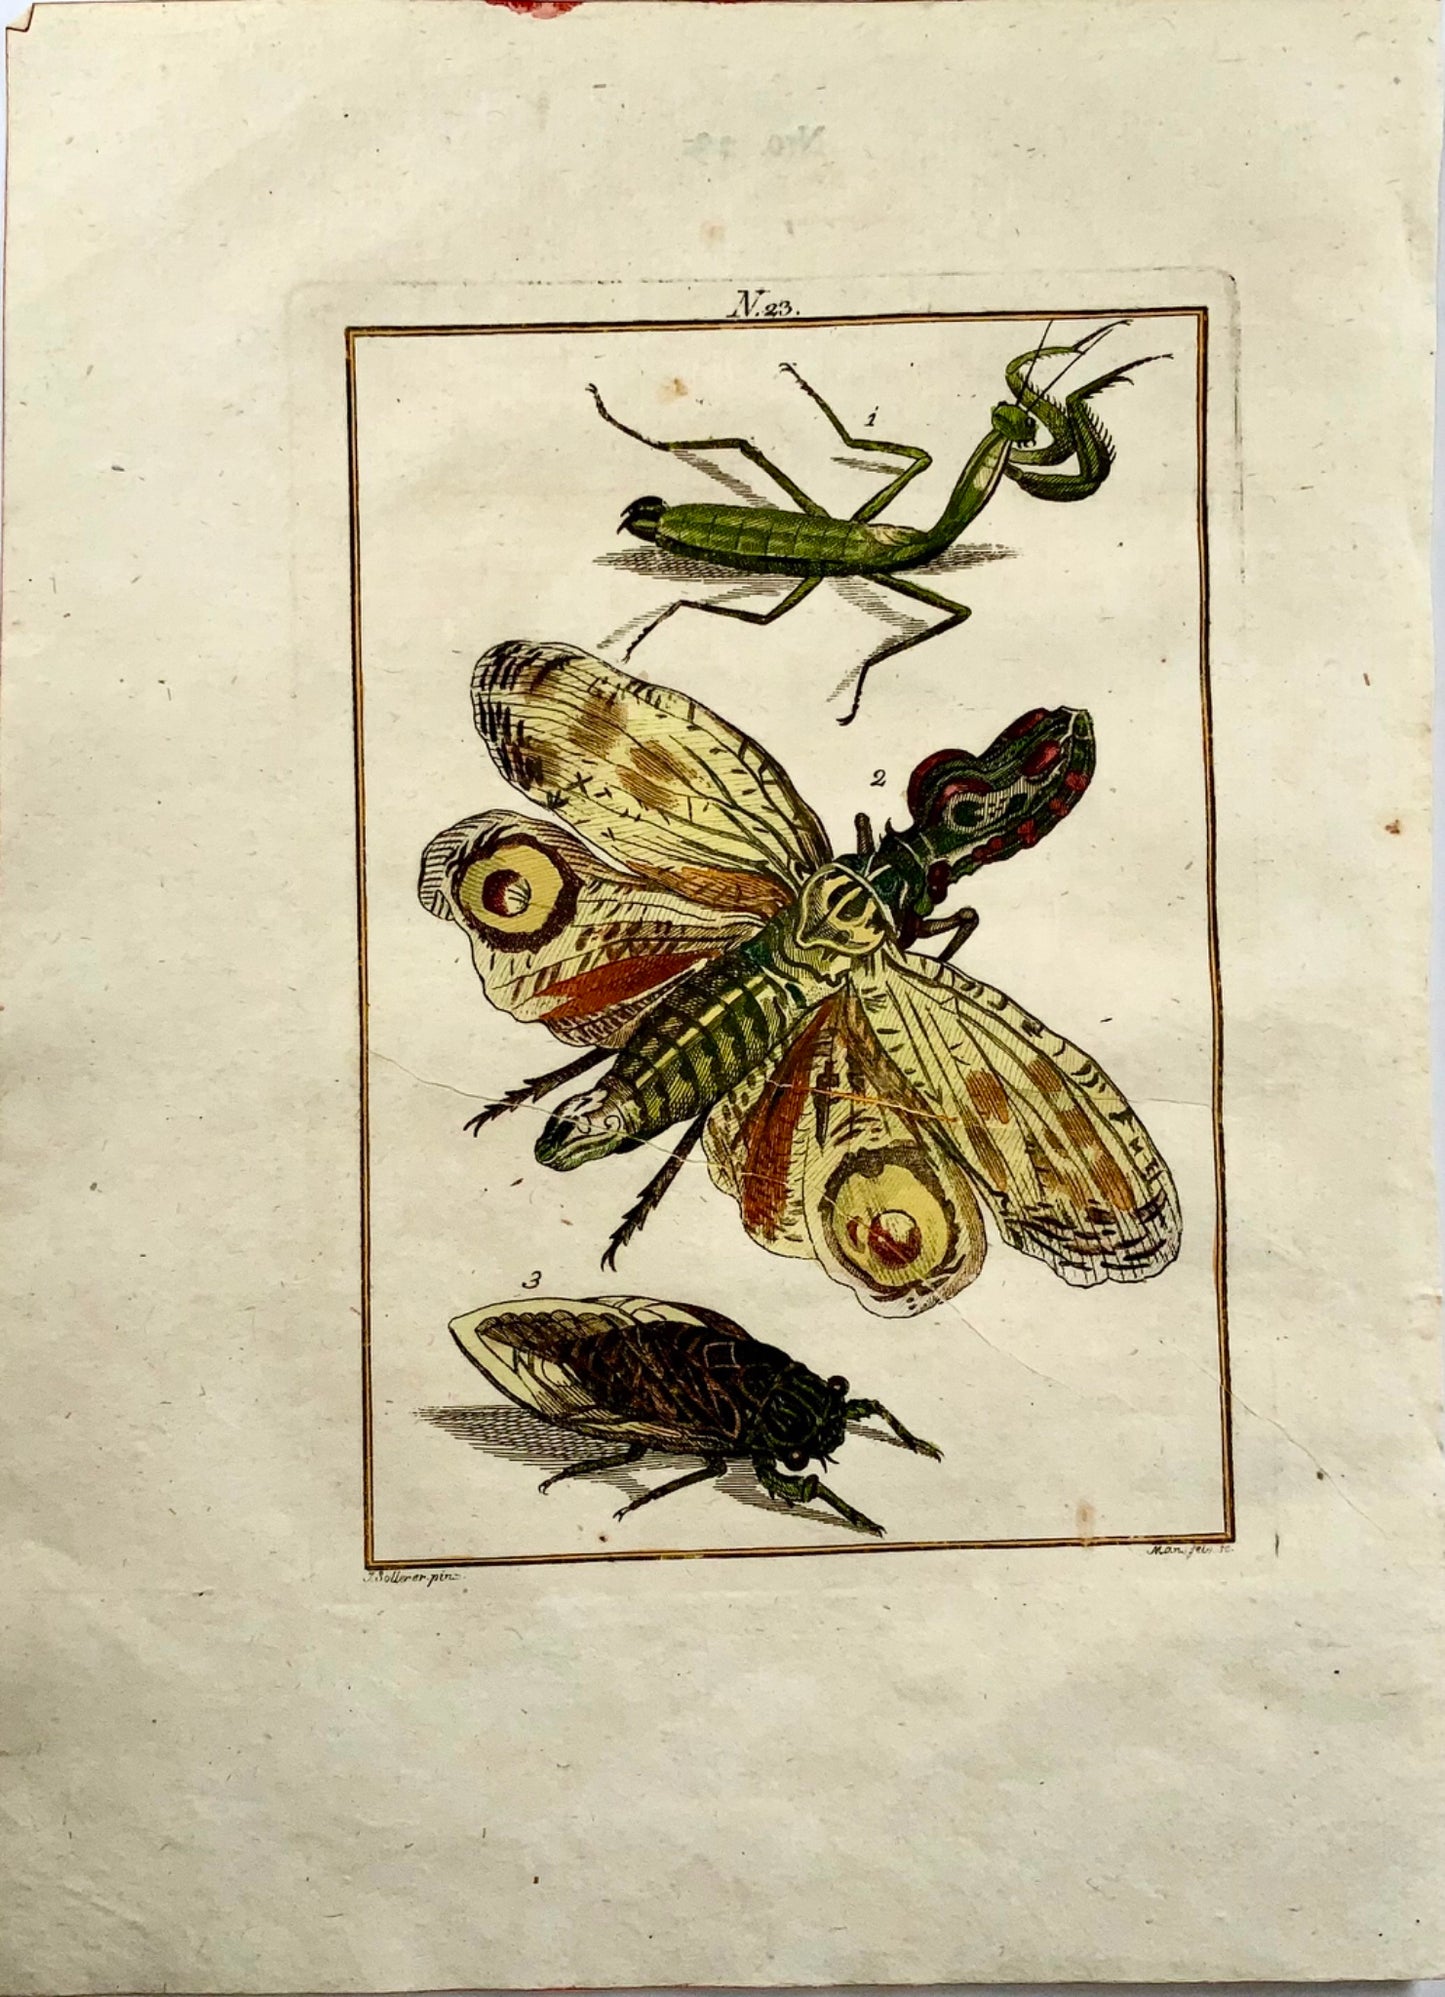 1790 Lantern Fly, insects, Joh. Sollerer, hand coloured engraving